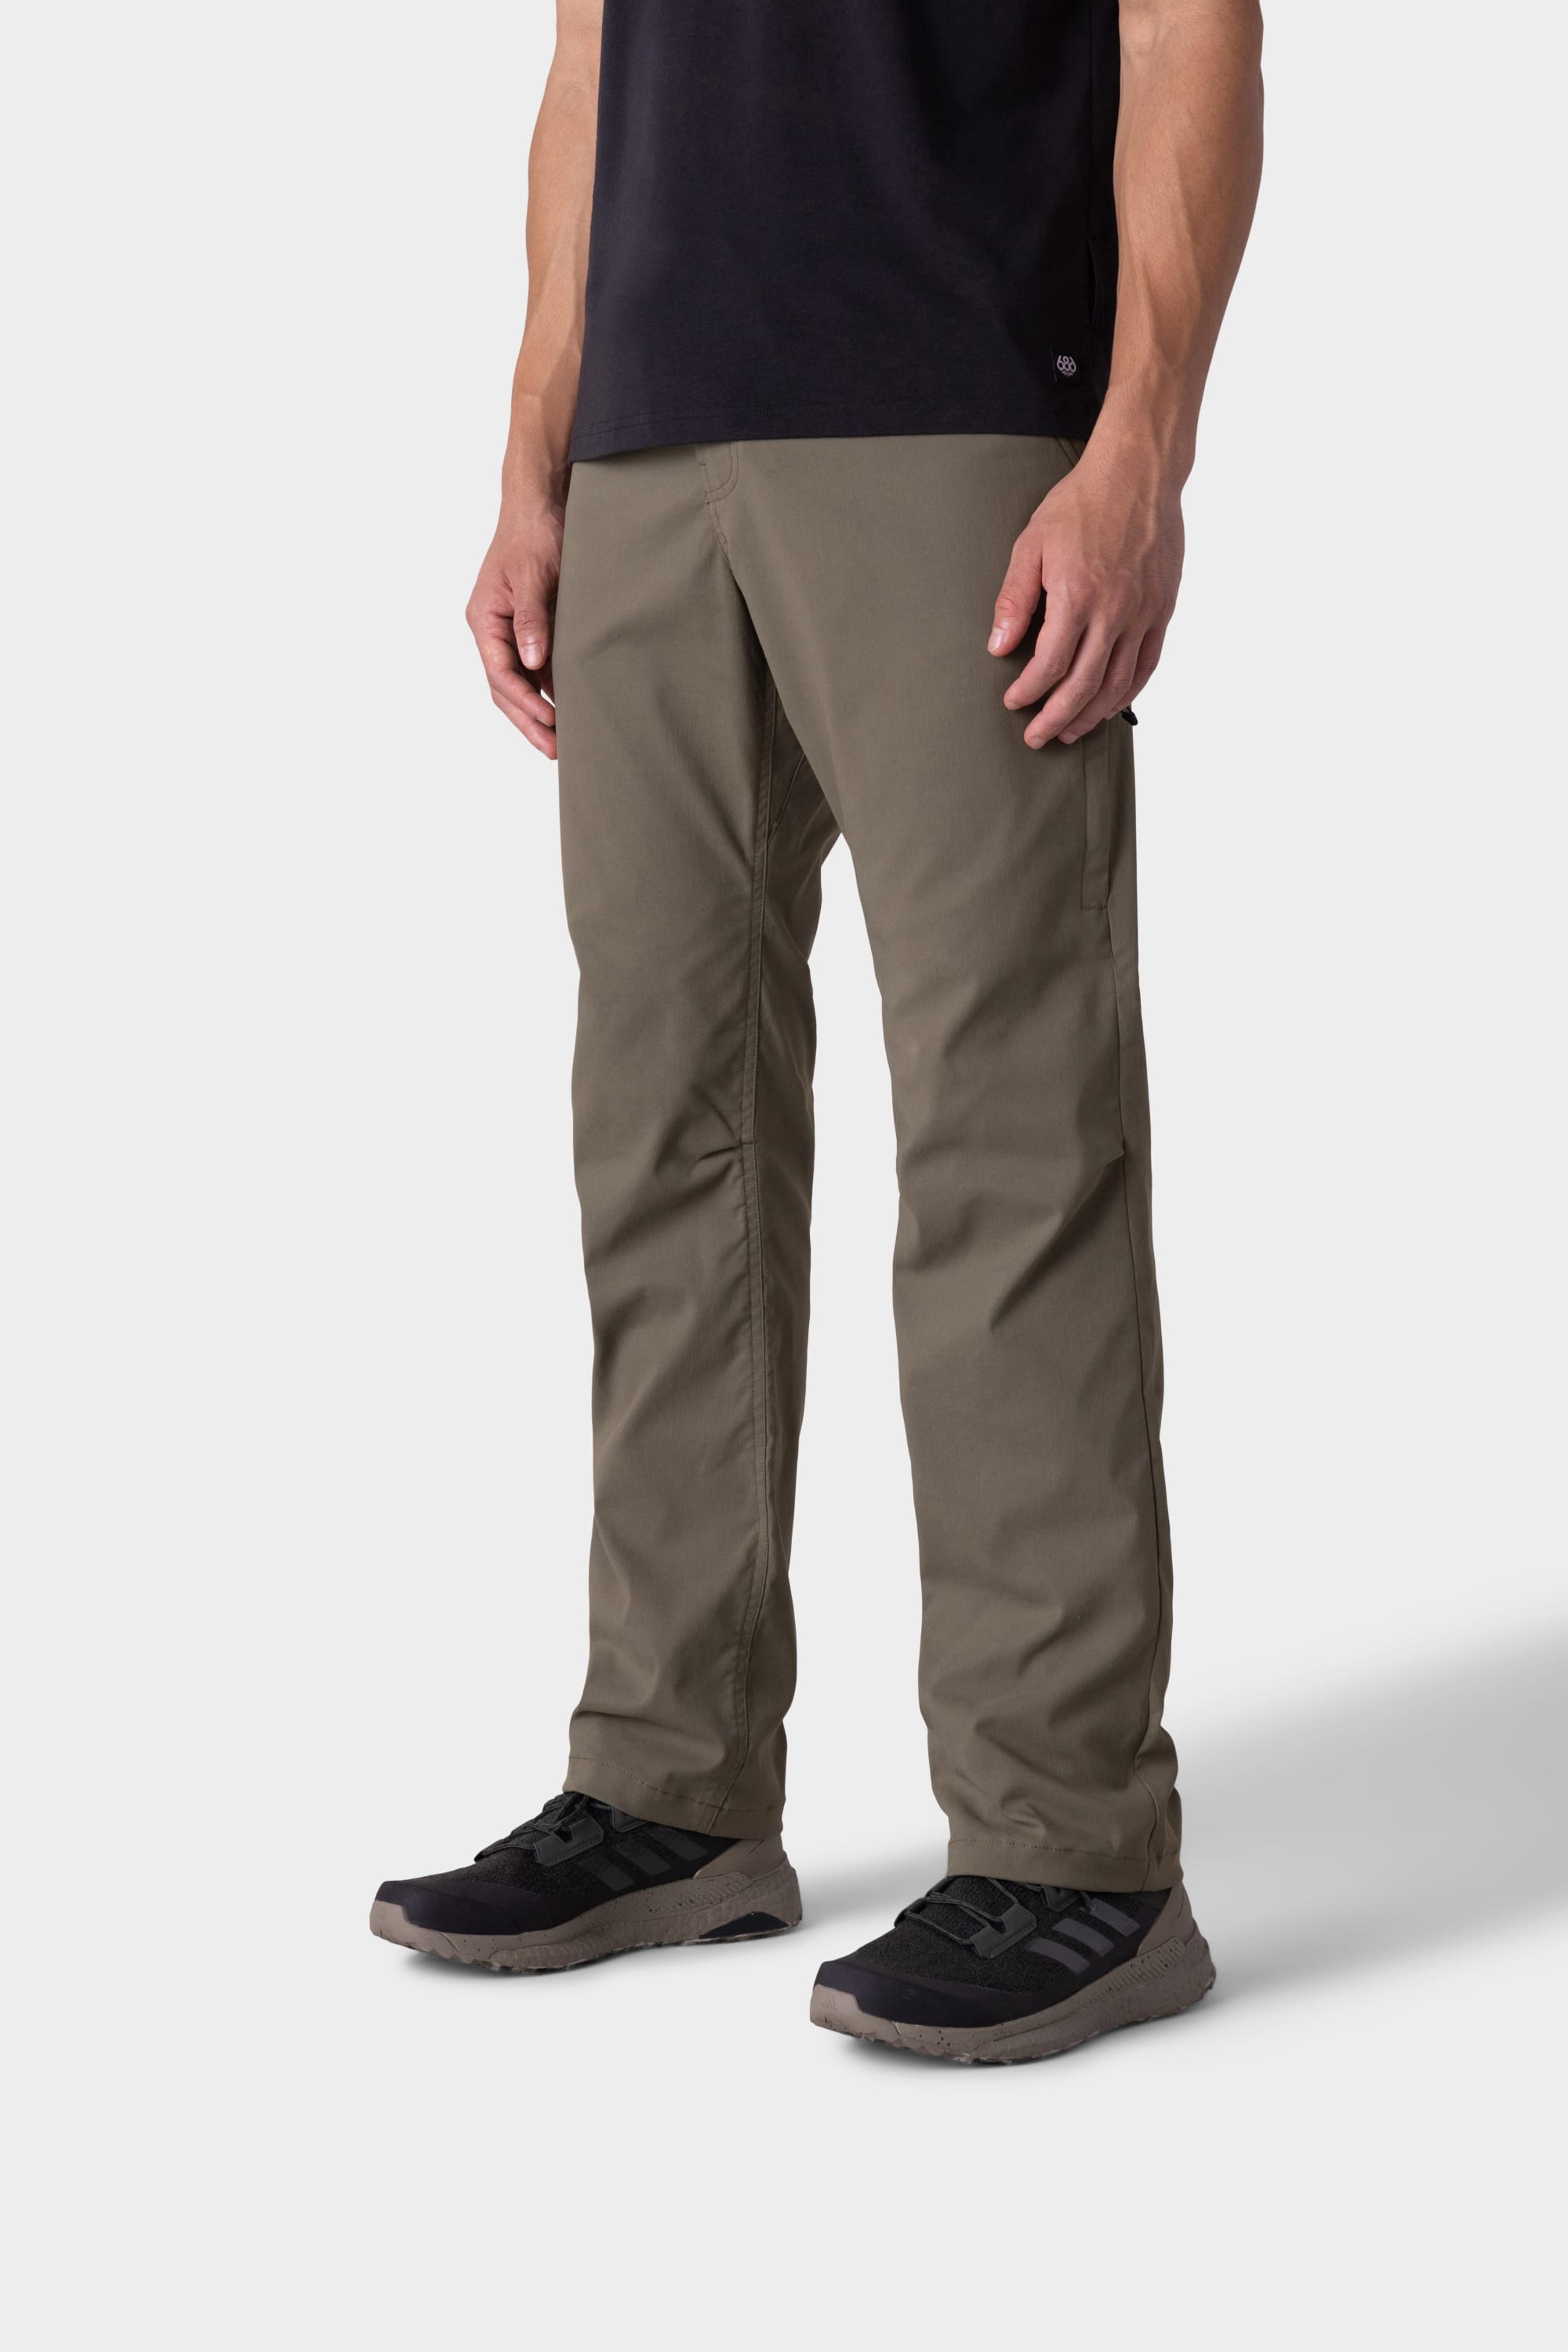 Alternate View 55 of 686 Men's Everywhere Pant - Relaxed Fit